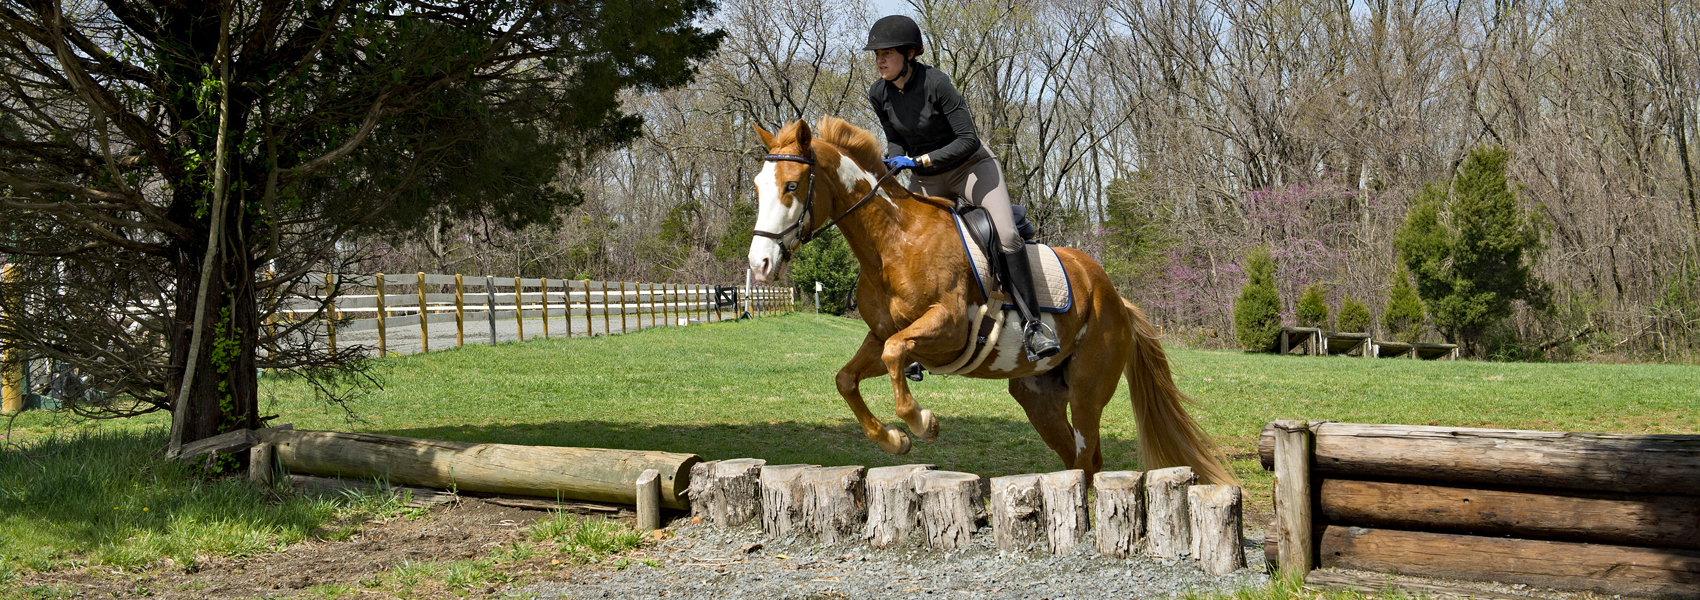 Horse and rider jump over an outdoor obstacle of wooden stumps